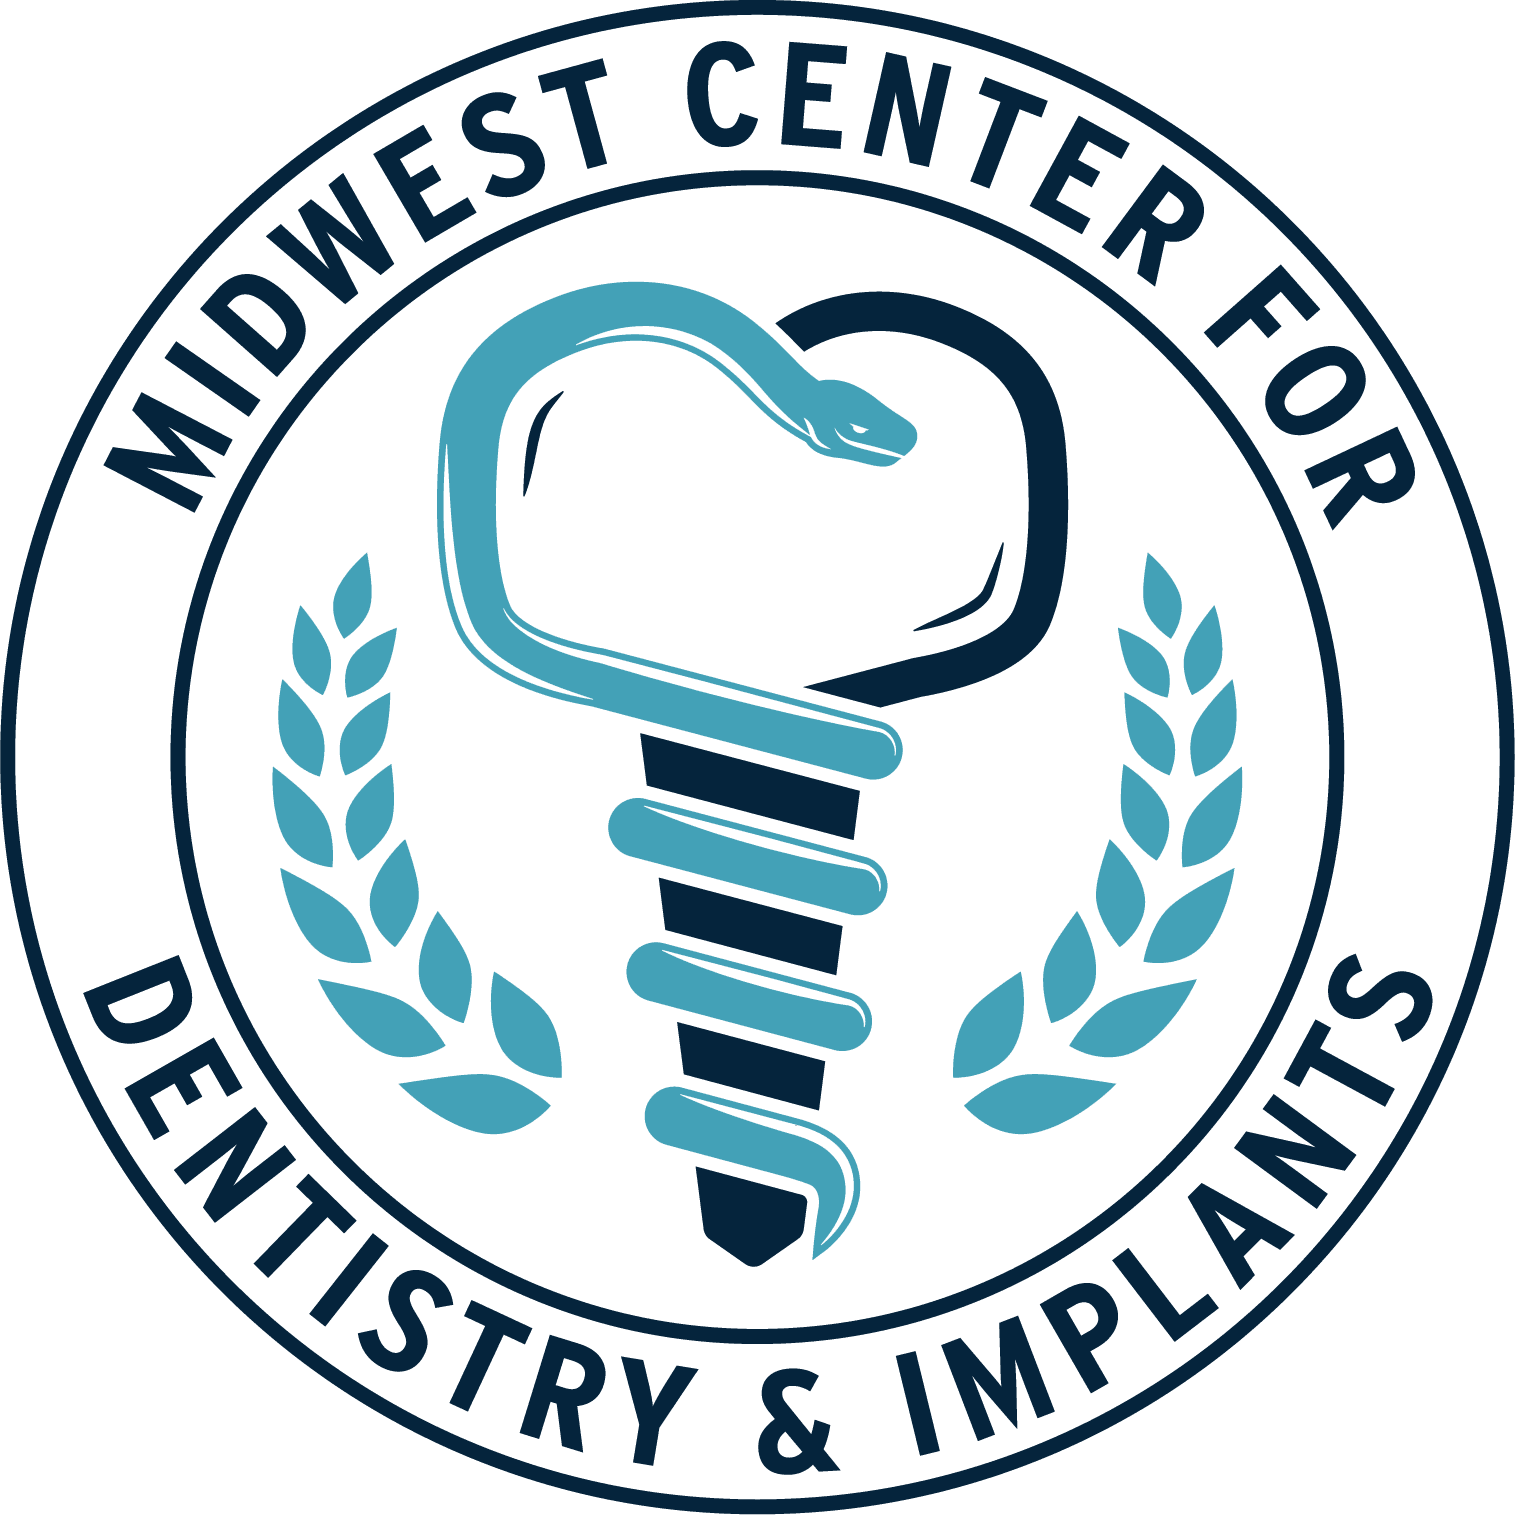 Visit Midwest Center for Dentistry and Implants